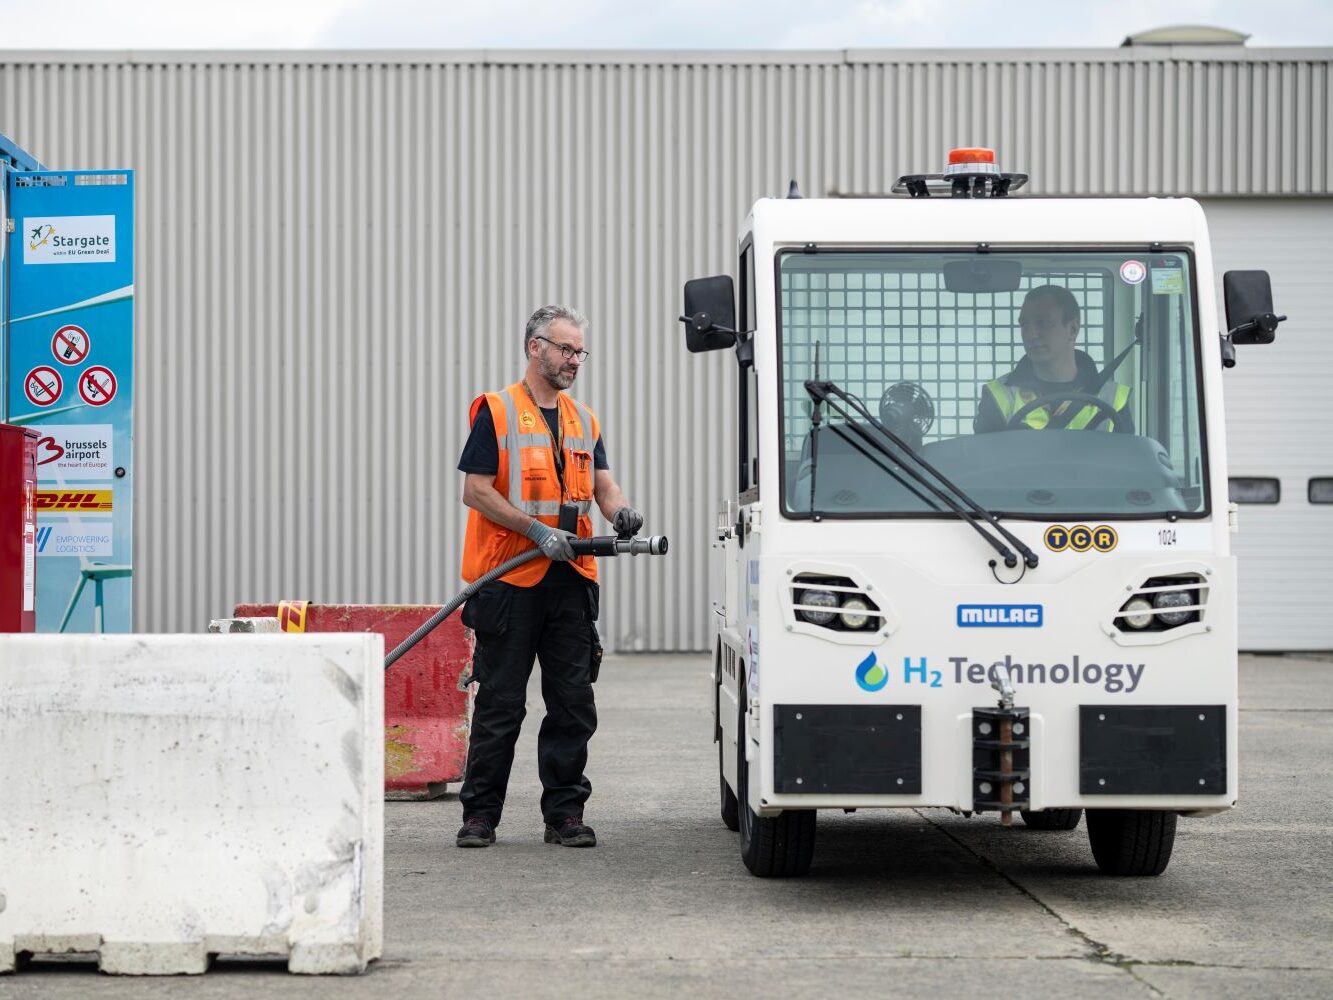 Brussels Airport Pilots Hydrogen Tractor and Refuelling Station